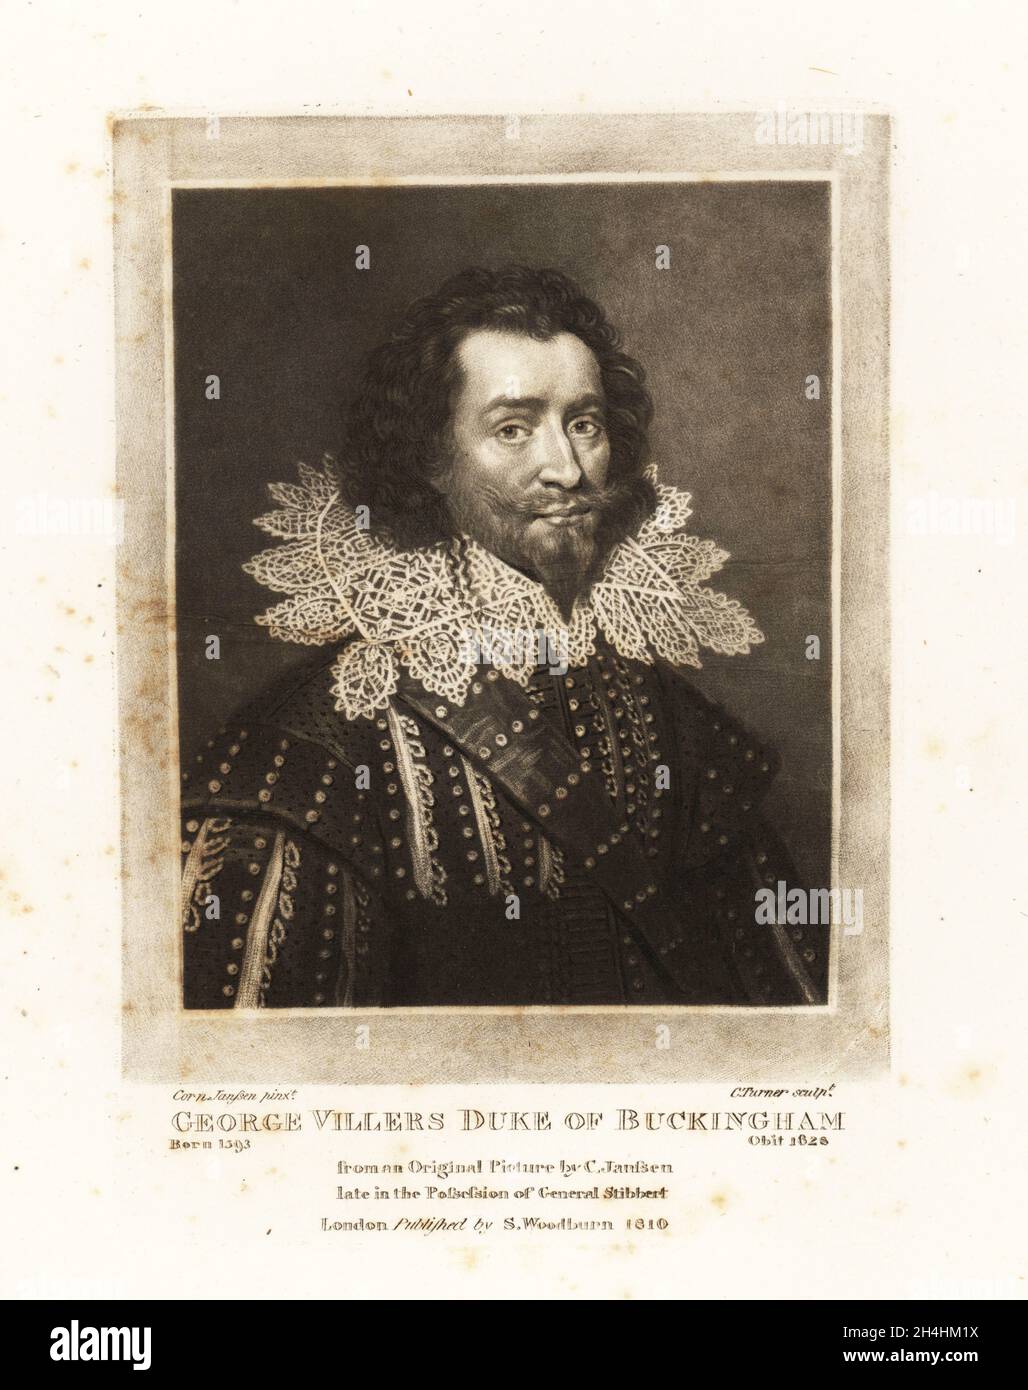 George Villiers, 1st Duke of Buckingham, 1592-1628, English courtier, statesman, and patron of the arts, favourite possibly lover of King James I. Mezzotint engraving by Charles Turner after a portrait by Cornelius Janssen from Richard Earlom and Charles Turner's Portraits of Characters Illustrious in British History Engraved in Mezzotinto, published by S. Woodburn, London, 1810. Stock Photo